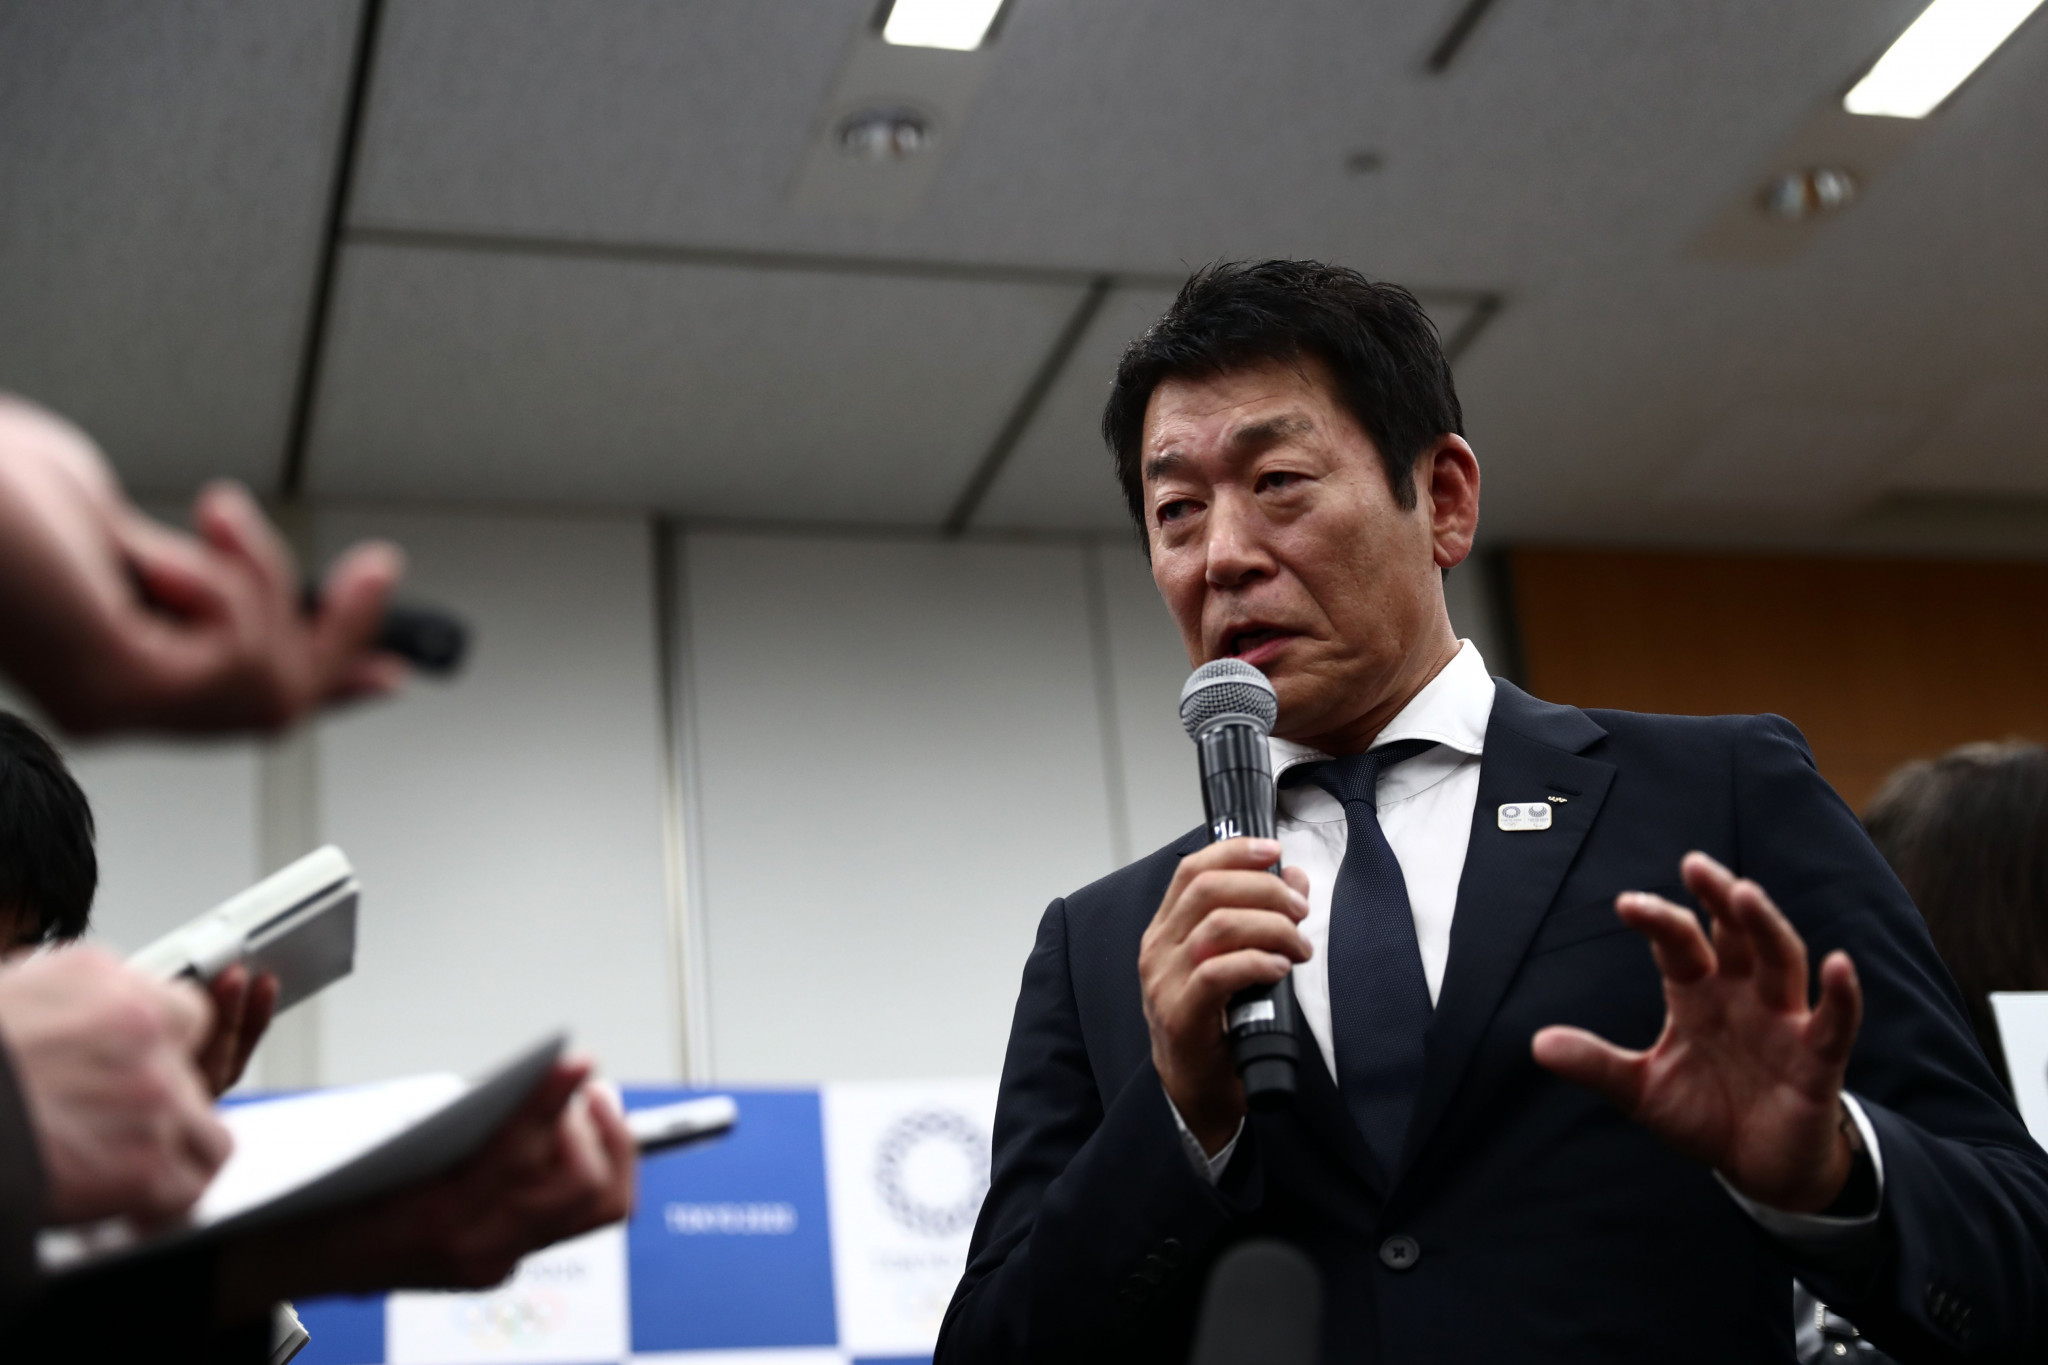 FIG President Morinari Watanabe revealed he wants gymnastics to be "role model of inclusivity" in a statement on diversity ©Getty Images